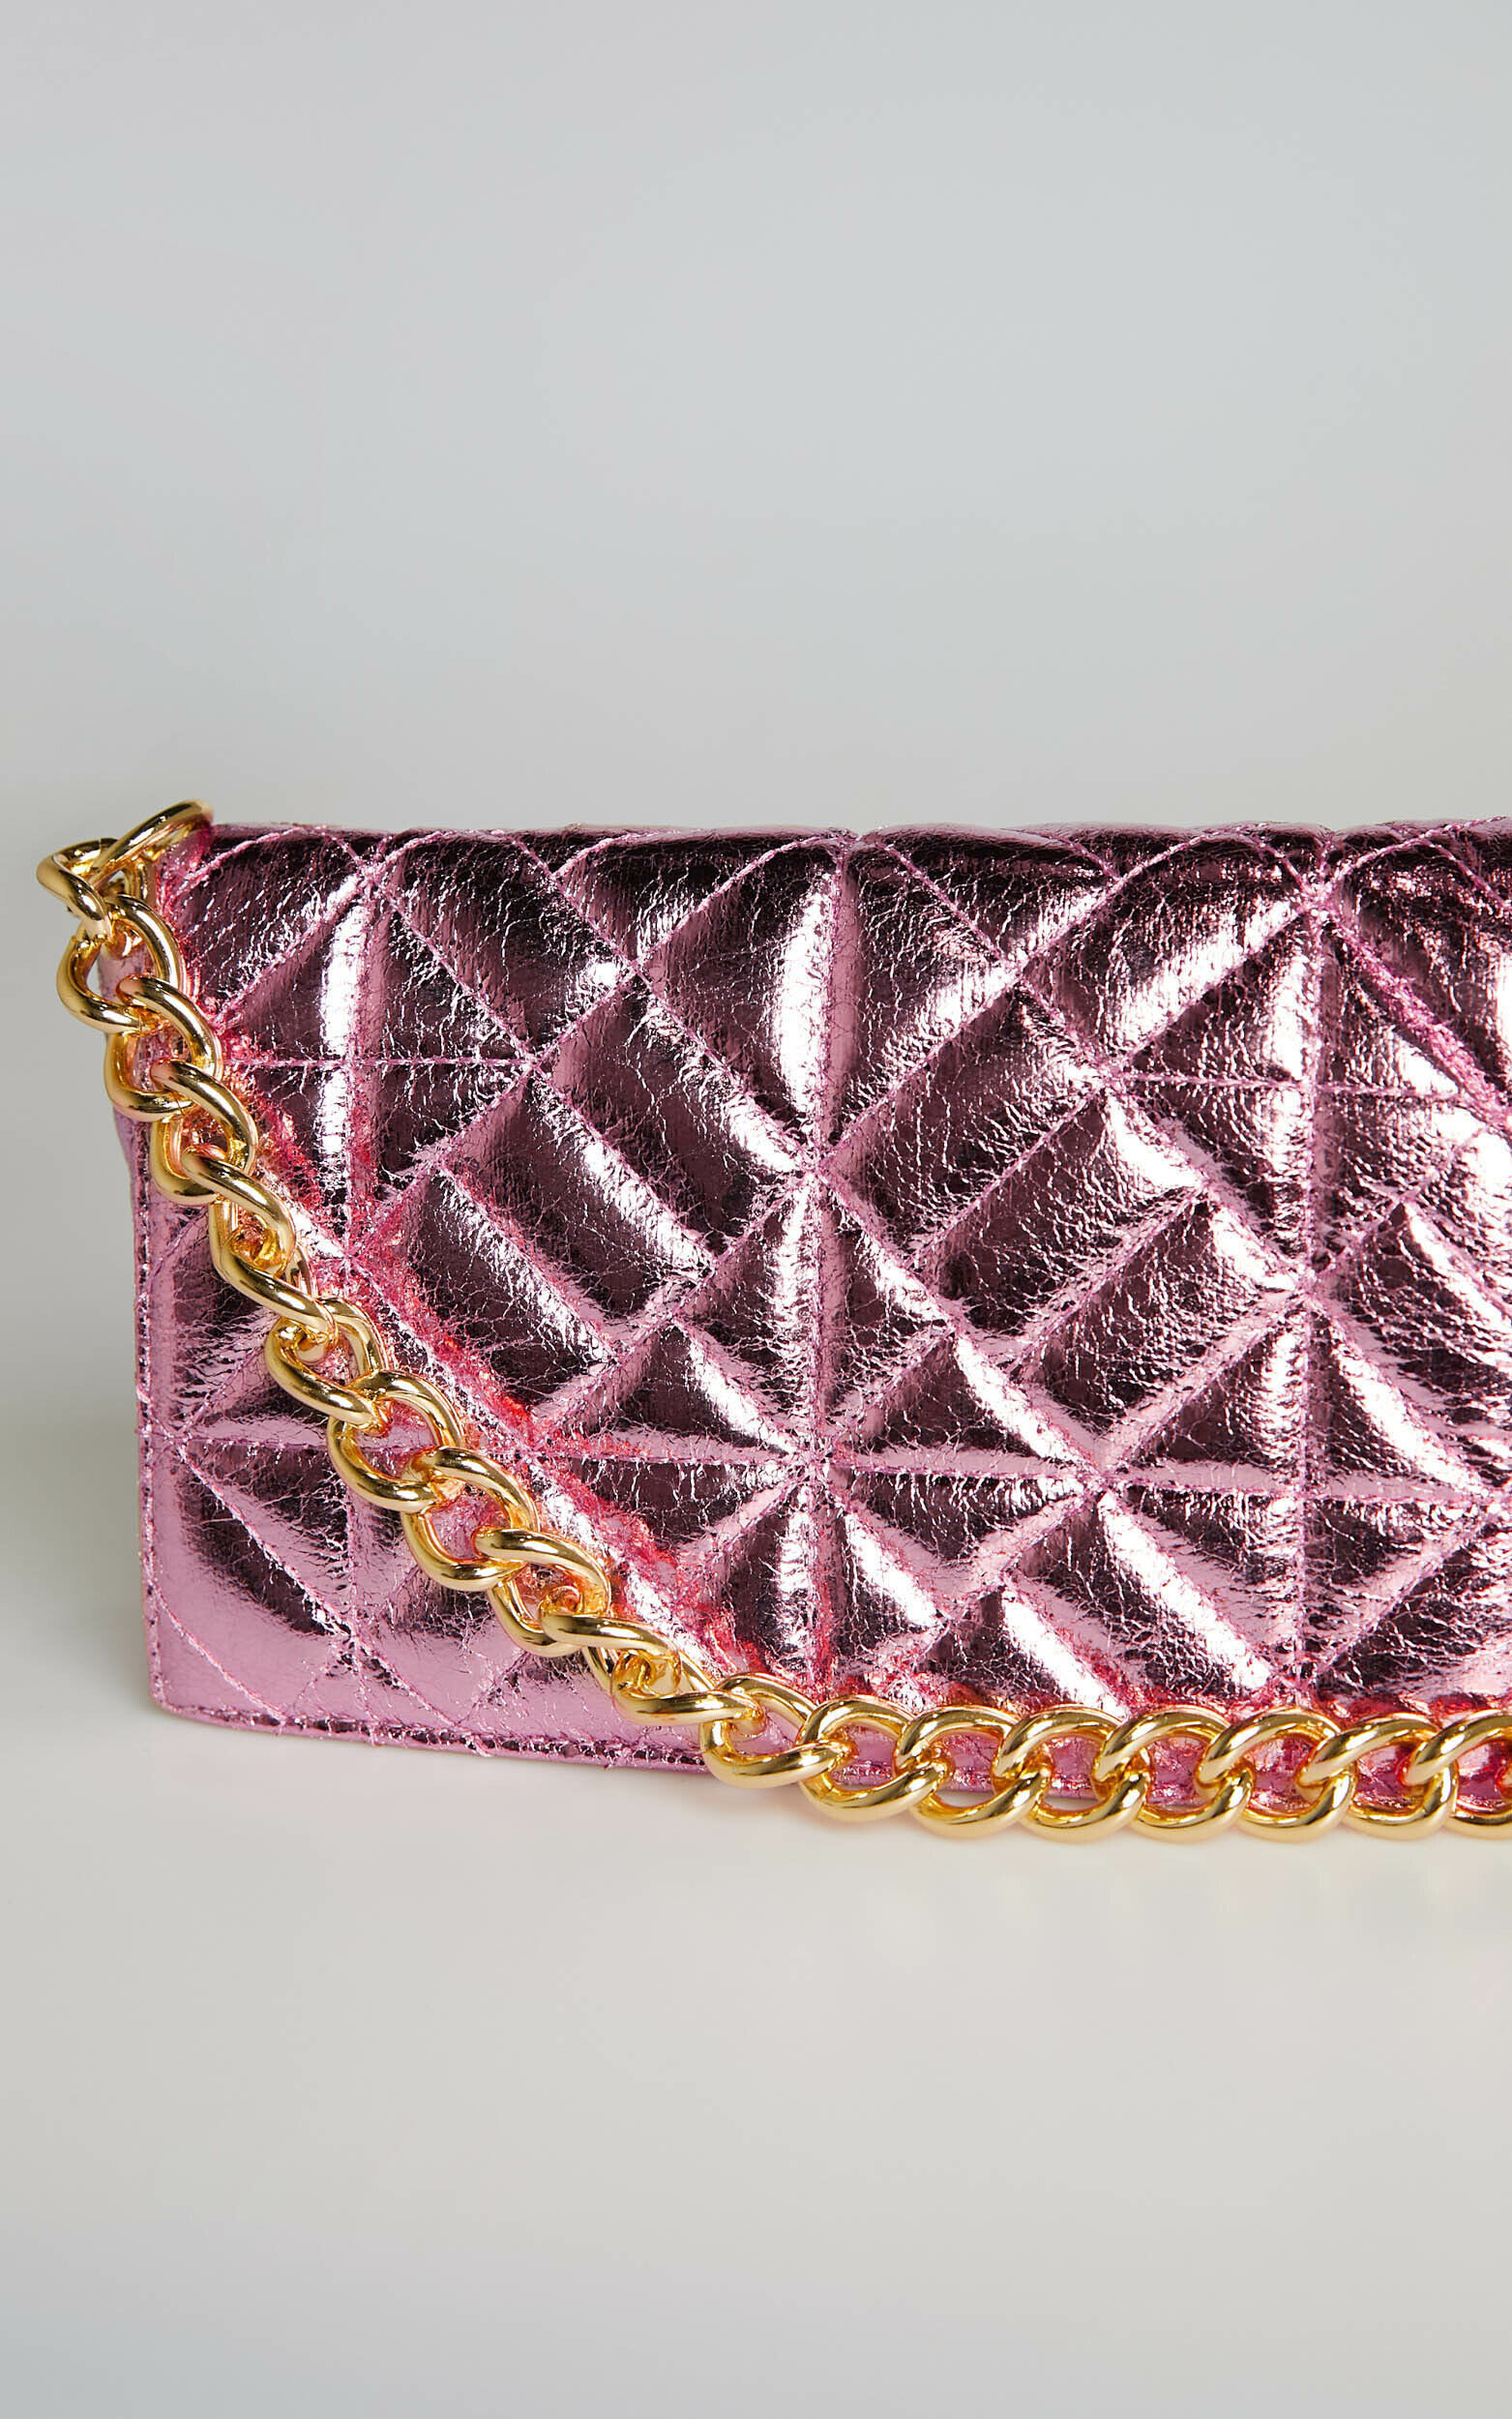 Ysolde Chain Strap Quilted Metallic Shoulder Bag in Pink